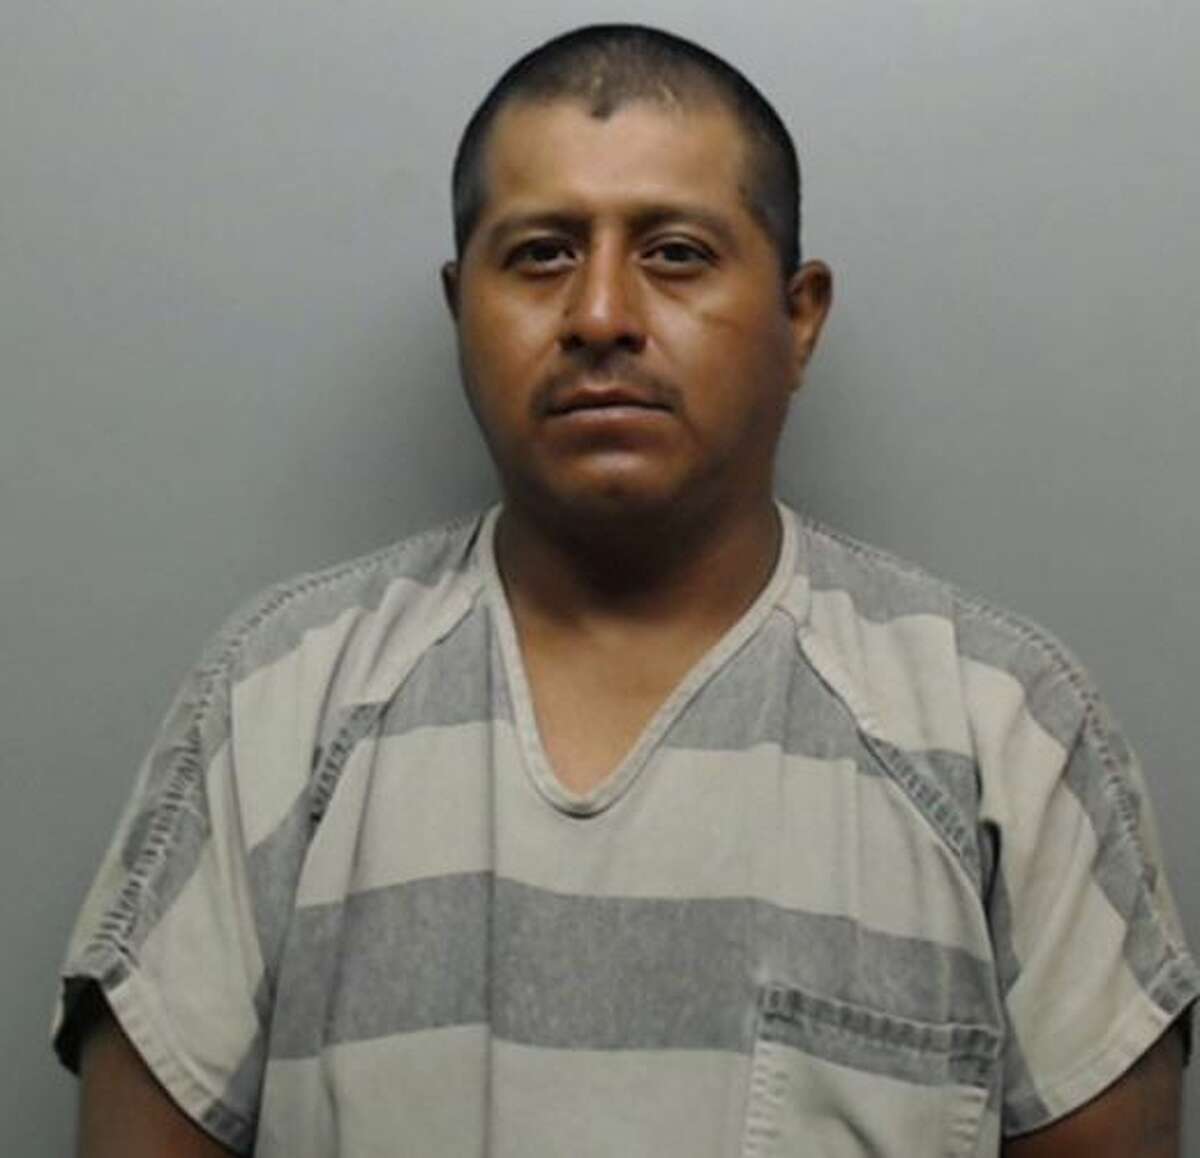 Alejandro Hernandez Mendoza, 36, was charged with aggravated assault with a knife.